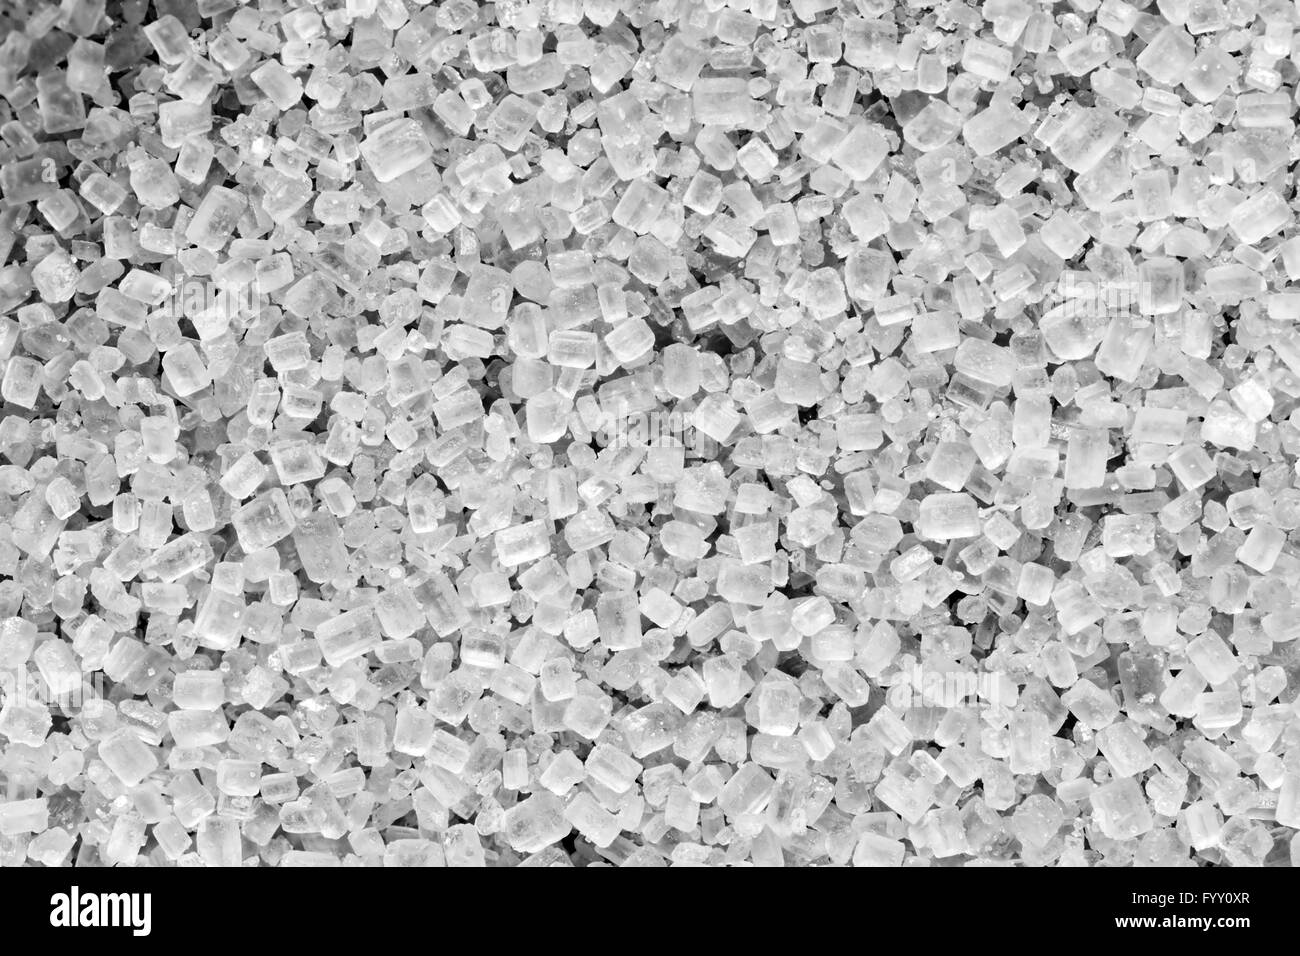 White sugar top view background. A close-up Stock Photo